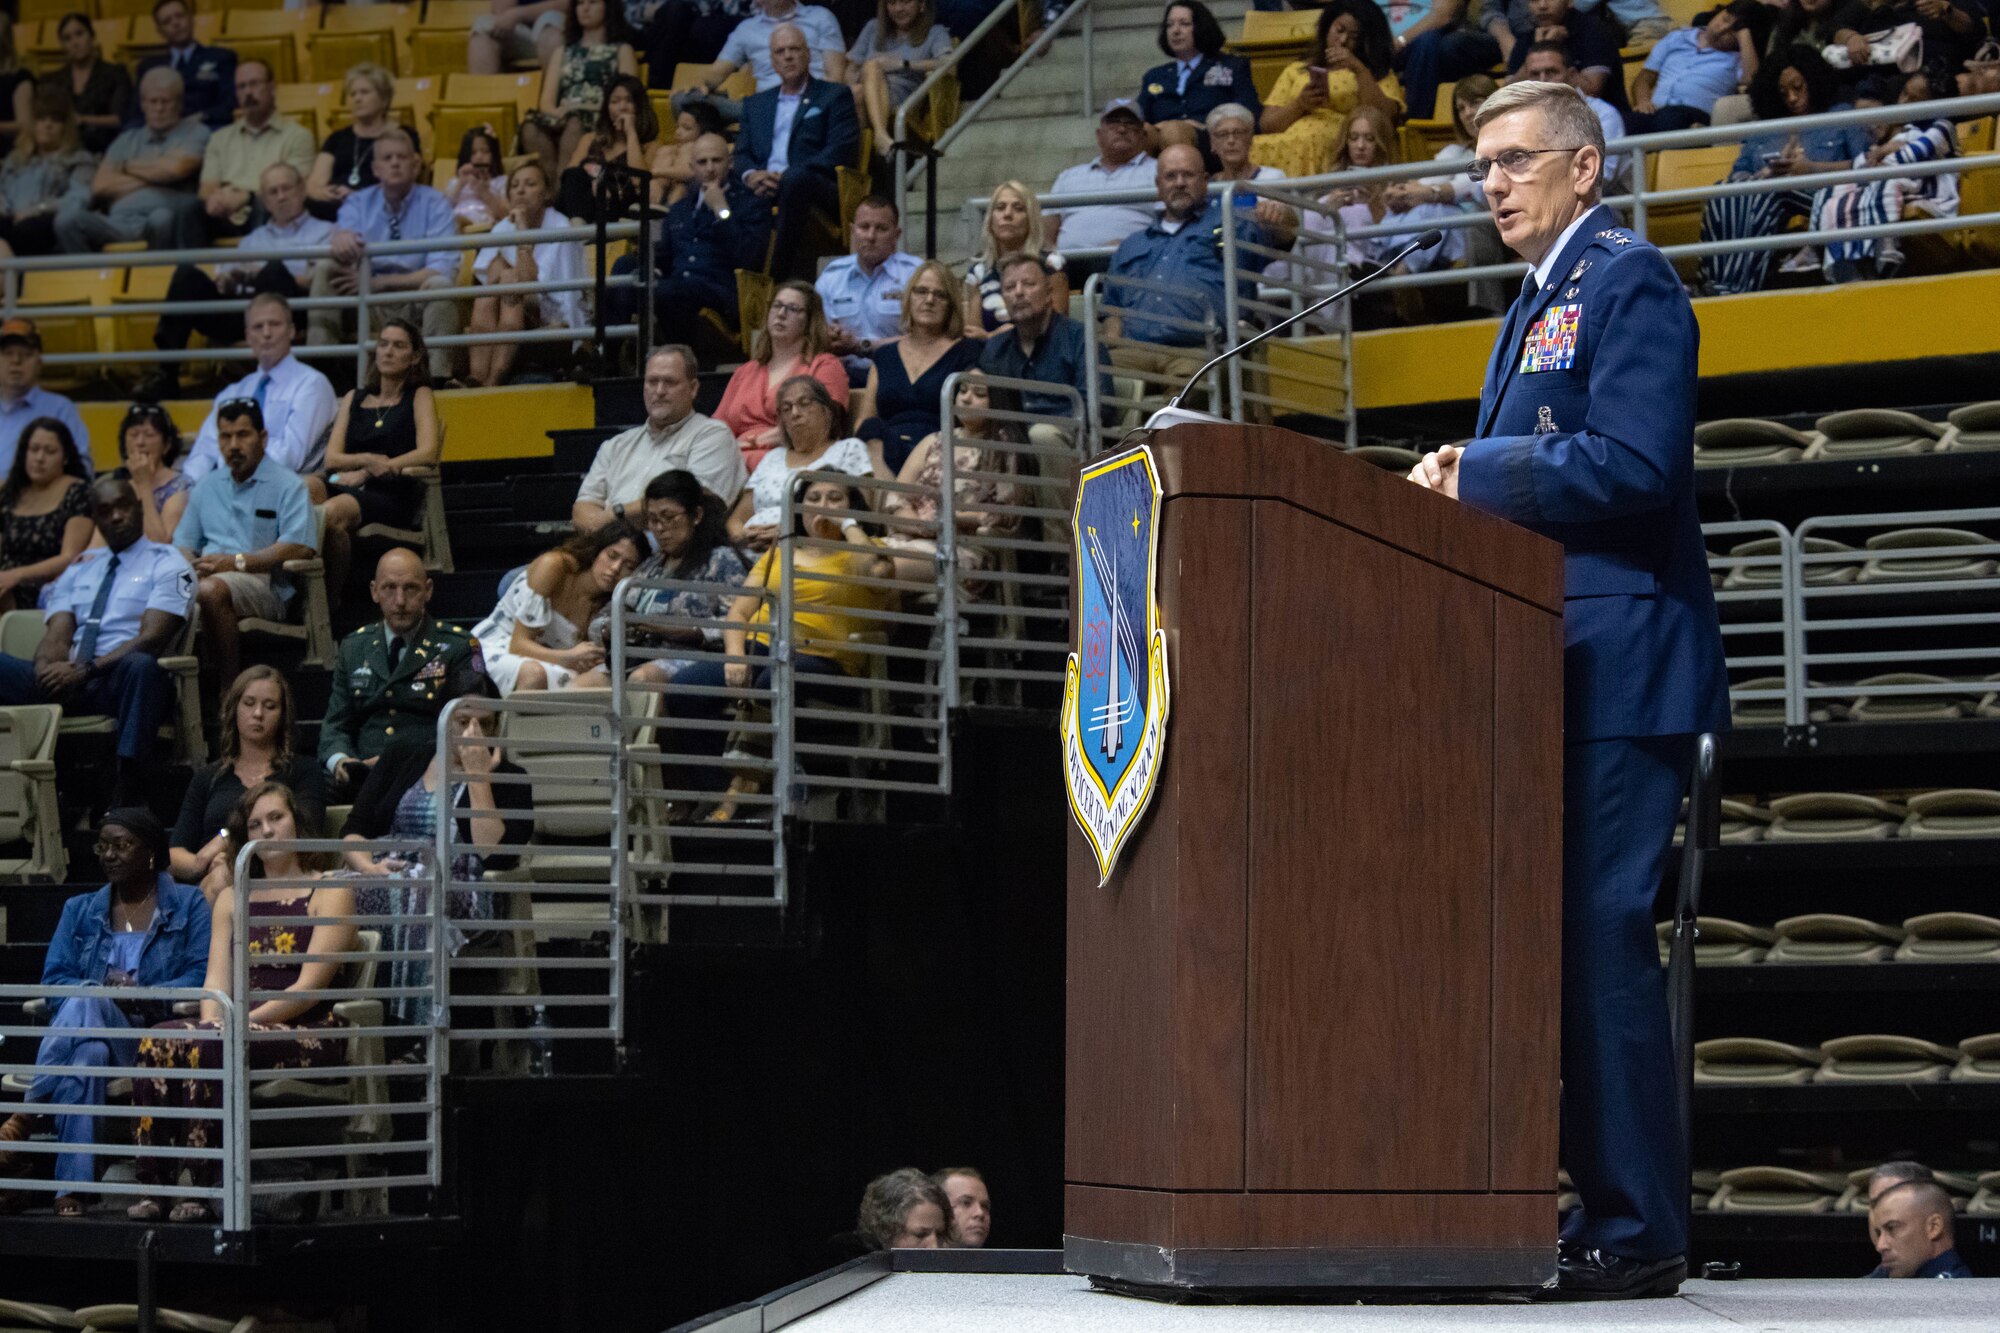 Gen. Tim Ray, Air Force Global Strike Command commander, presents awards to newly commissioned officers from Air University’s Officer Training School “Godzilla” class 19-07 during a ceremony at the Alabama State University Acadome, Montgomery, Ala., Sept. 26, 2019. The recipients earned these distinctions through their actions and dedication throughout the eight weeks of training.